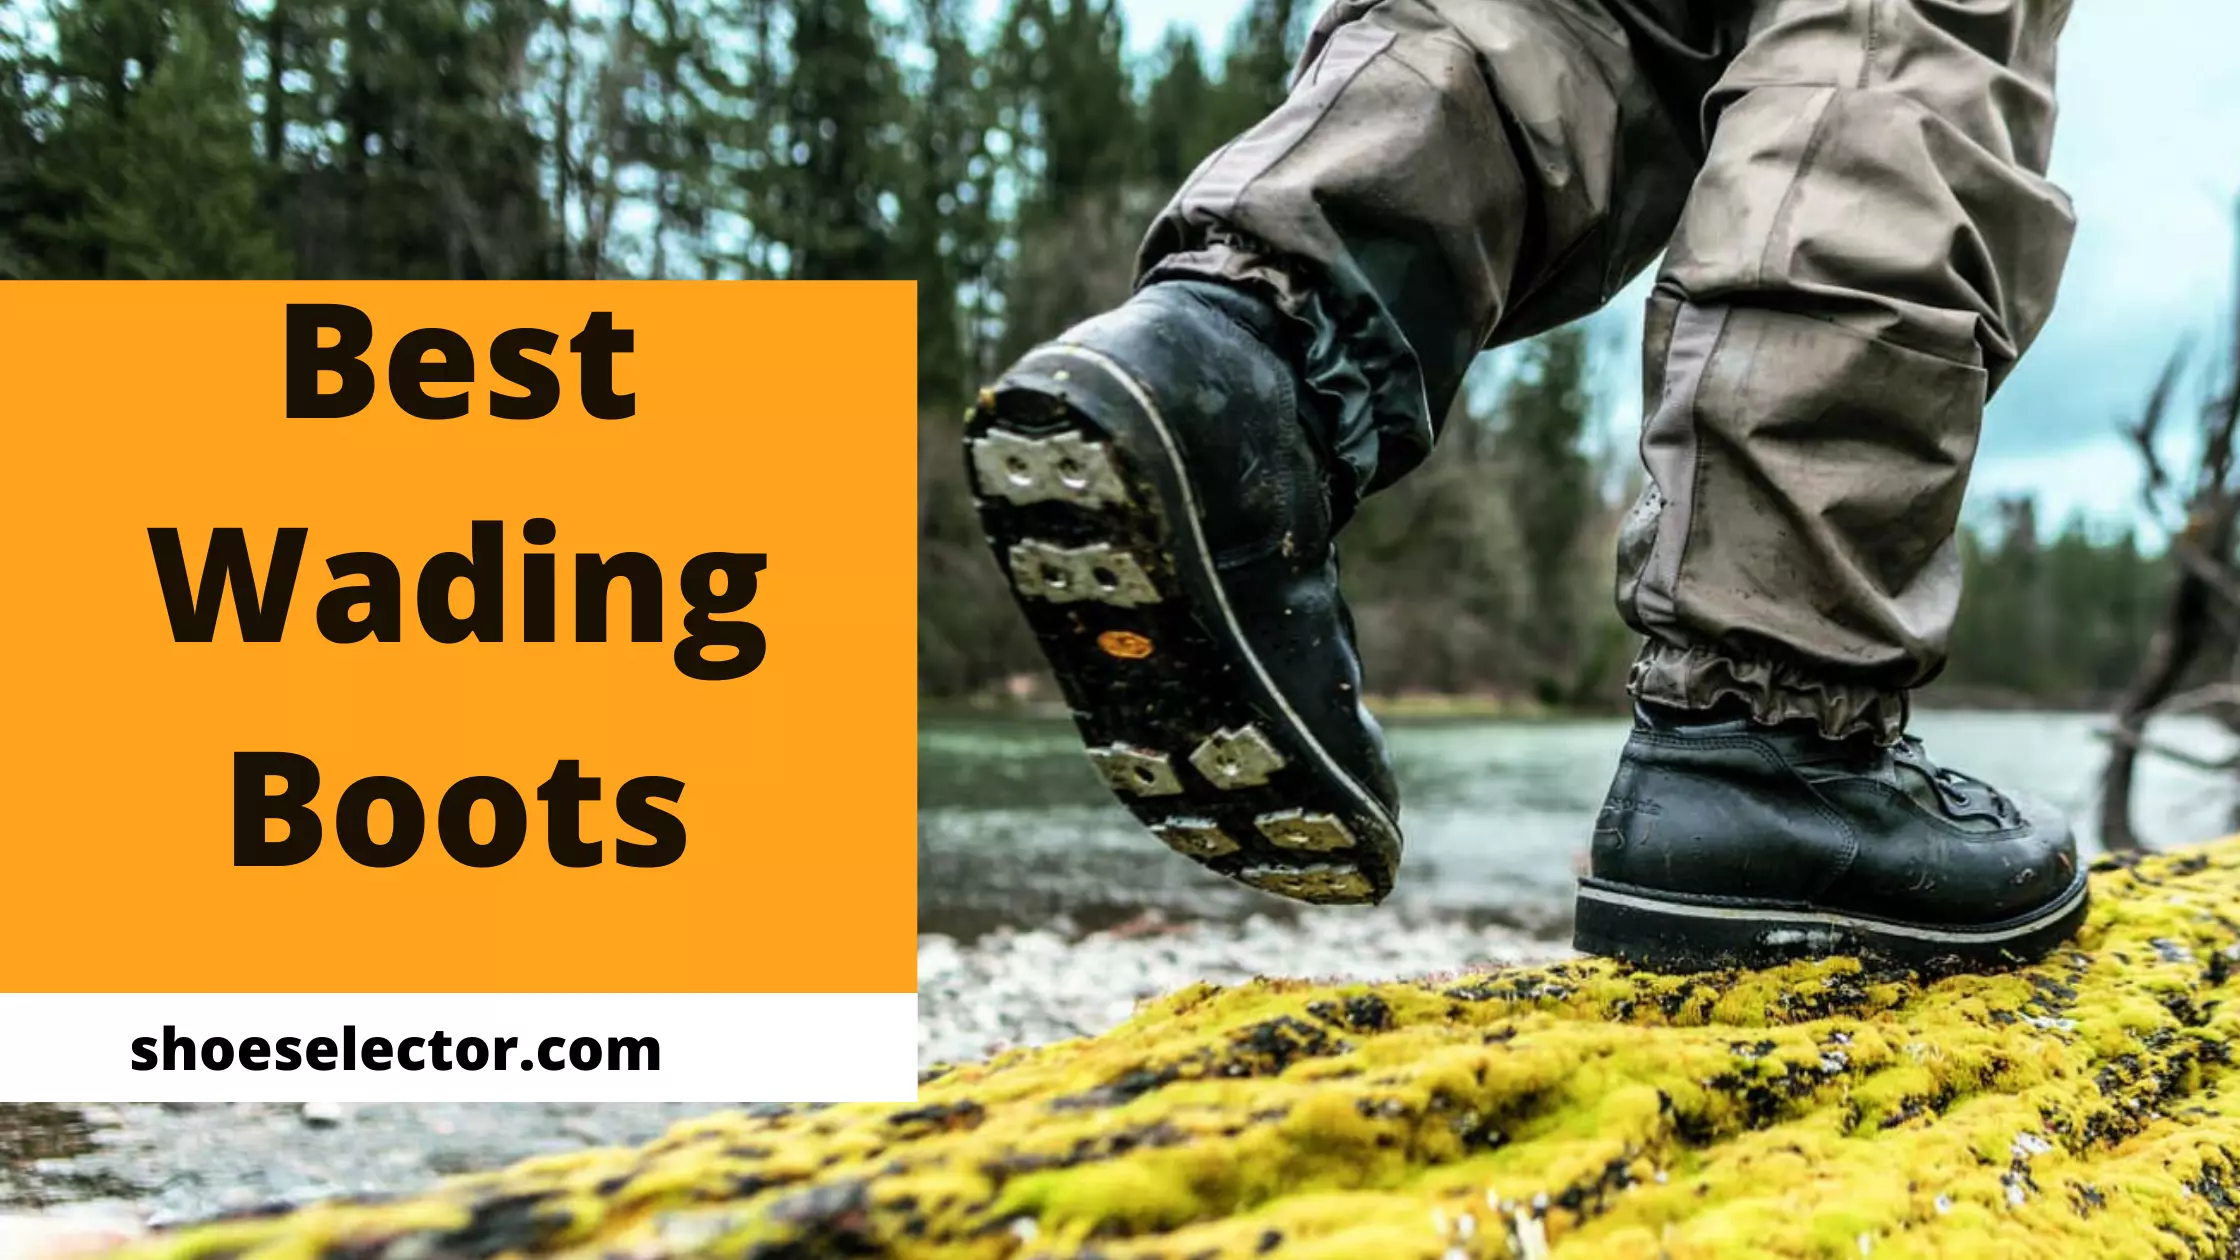 10 Best Wading Boots Reviews [REVEALED Top Rated for 2022]